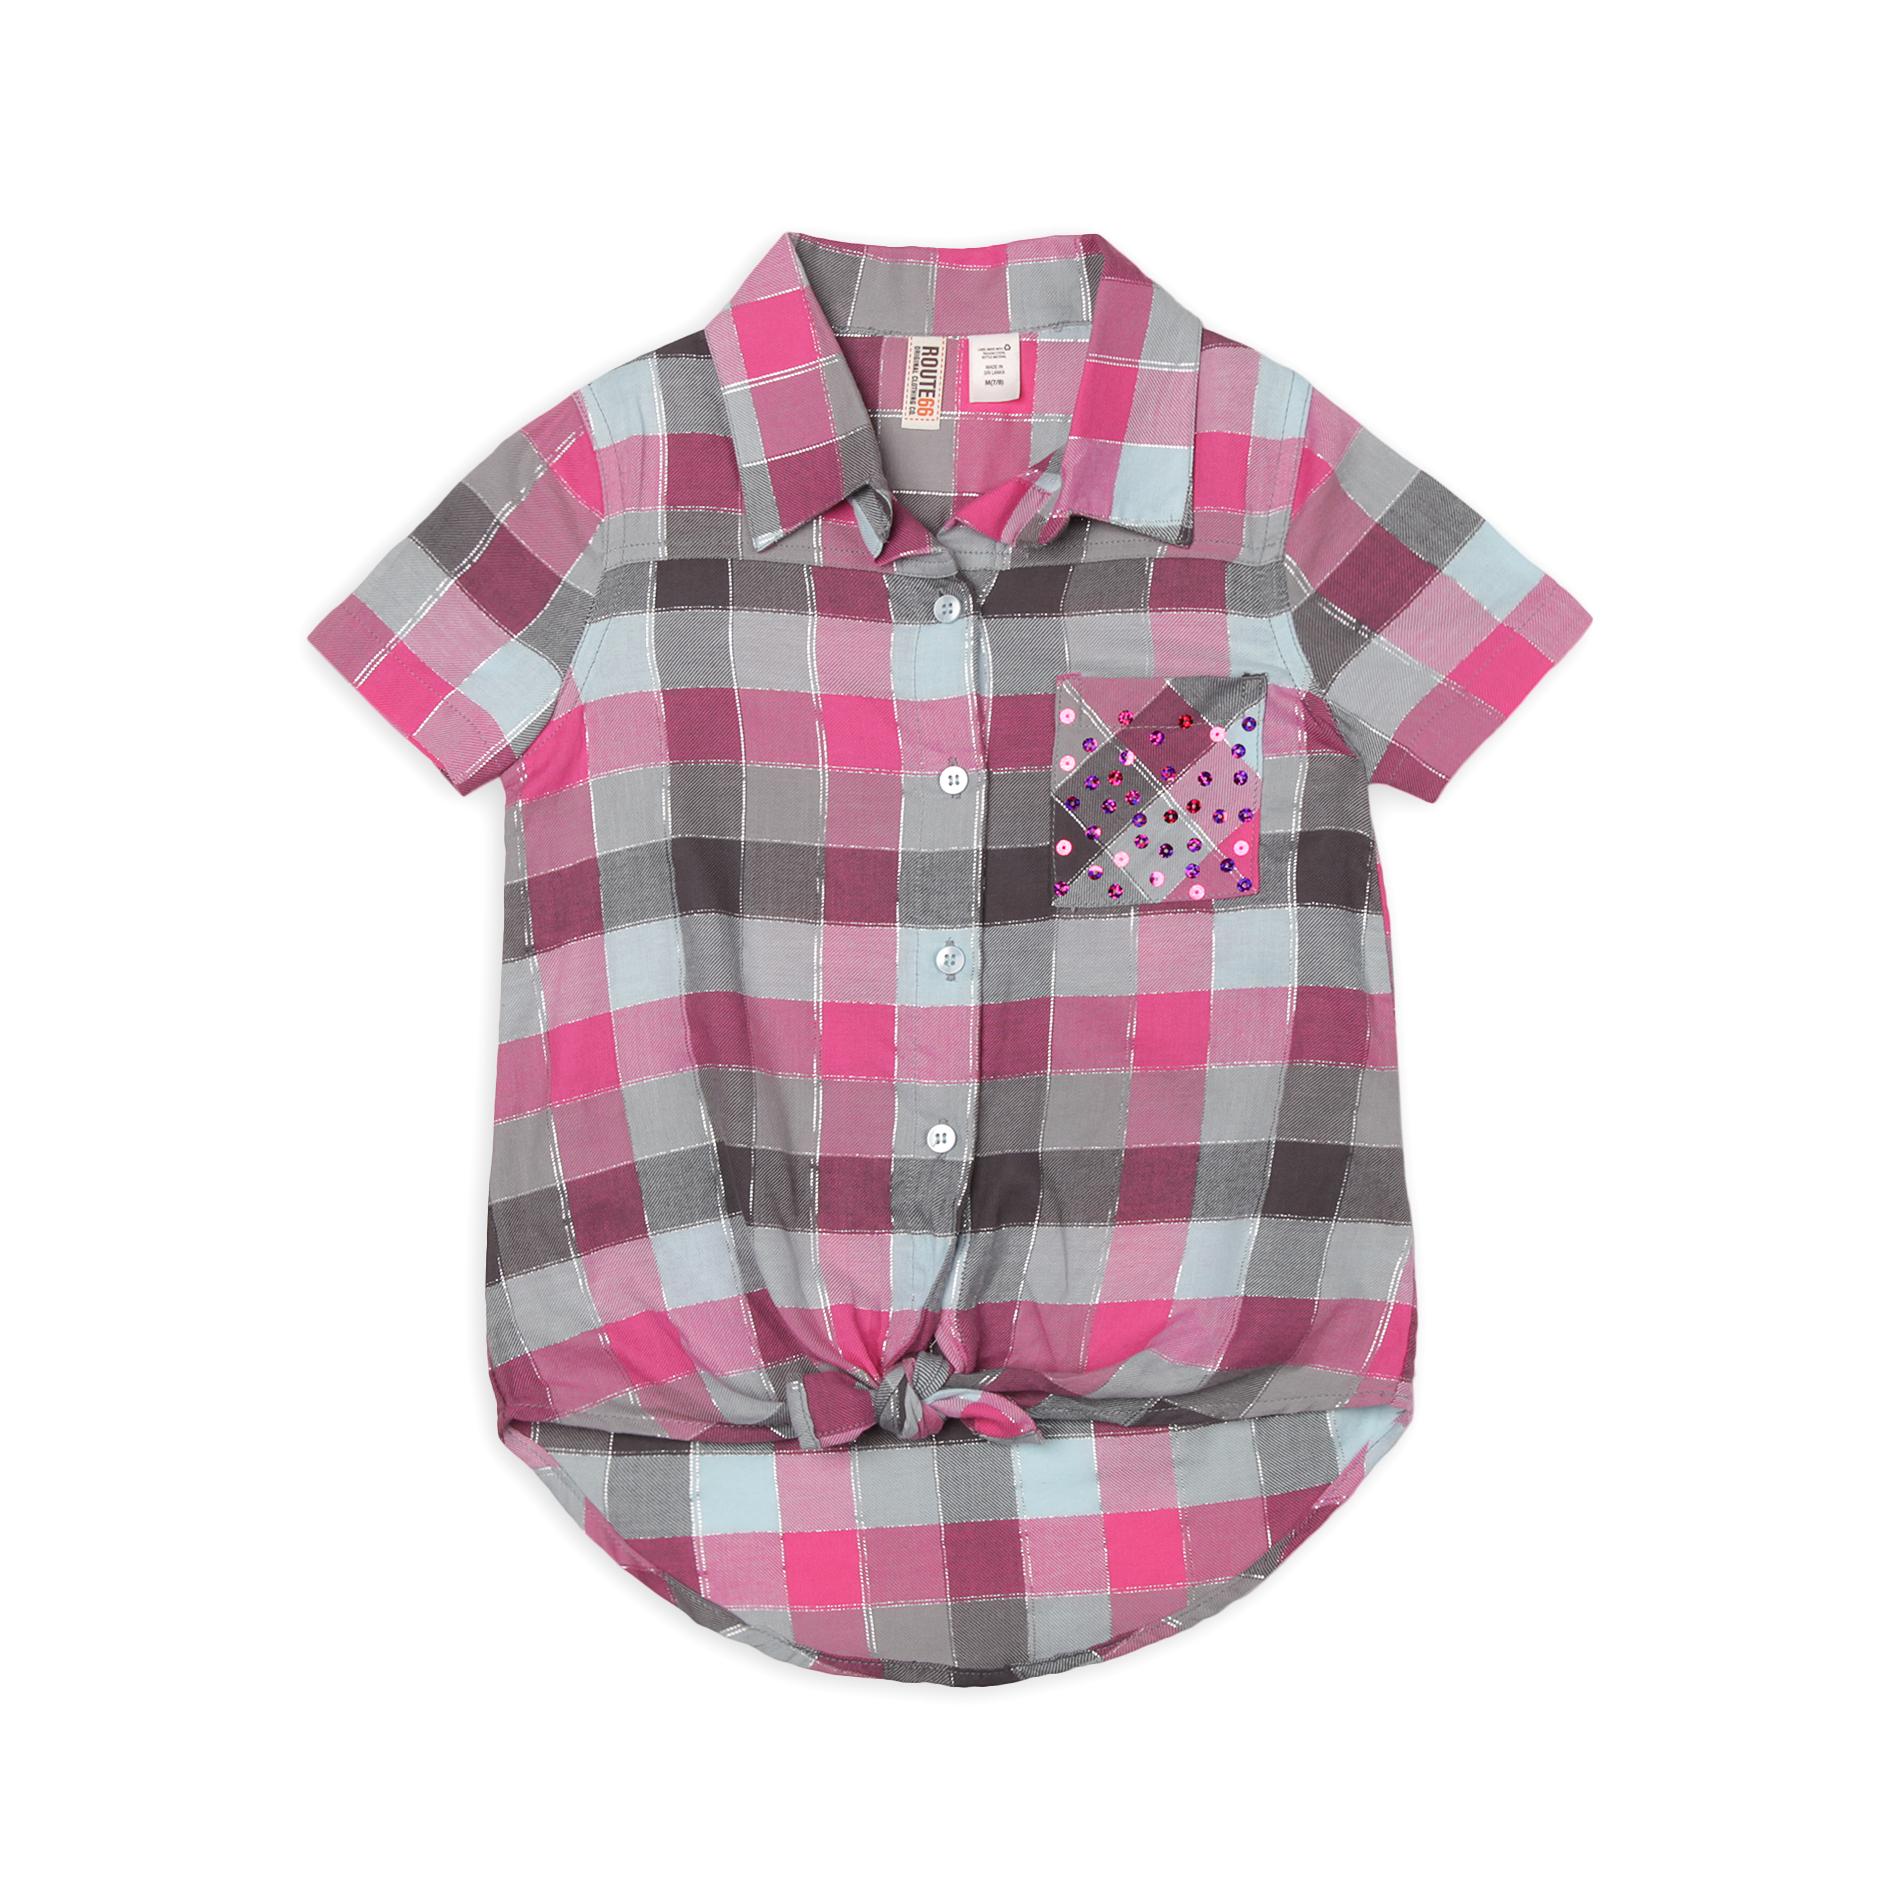 Route 66 Girl's Short-Sleeve Front-Tie Shirt - Plaid